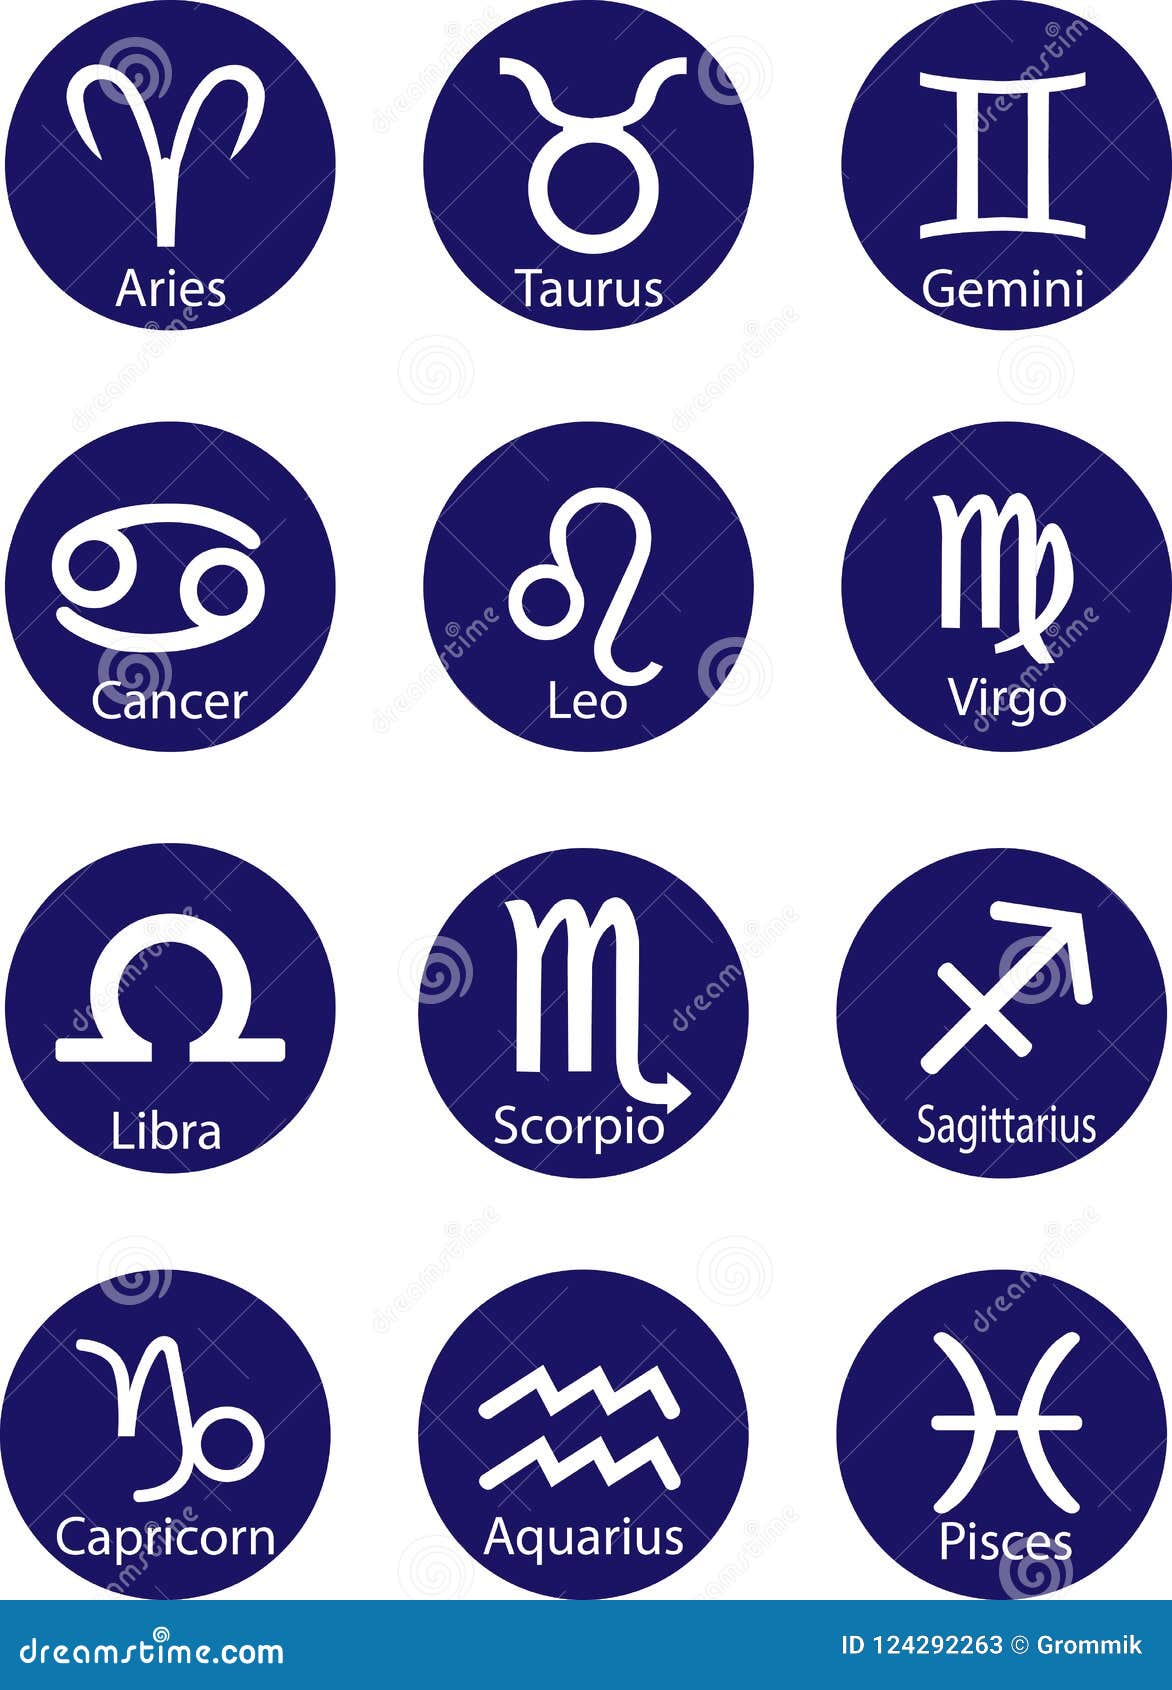 Zodiac Signs Icon with Inscriptions on the Blue Circle, Flat Image ...